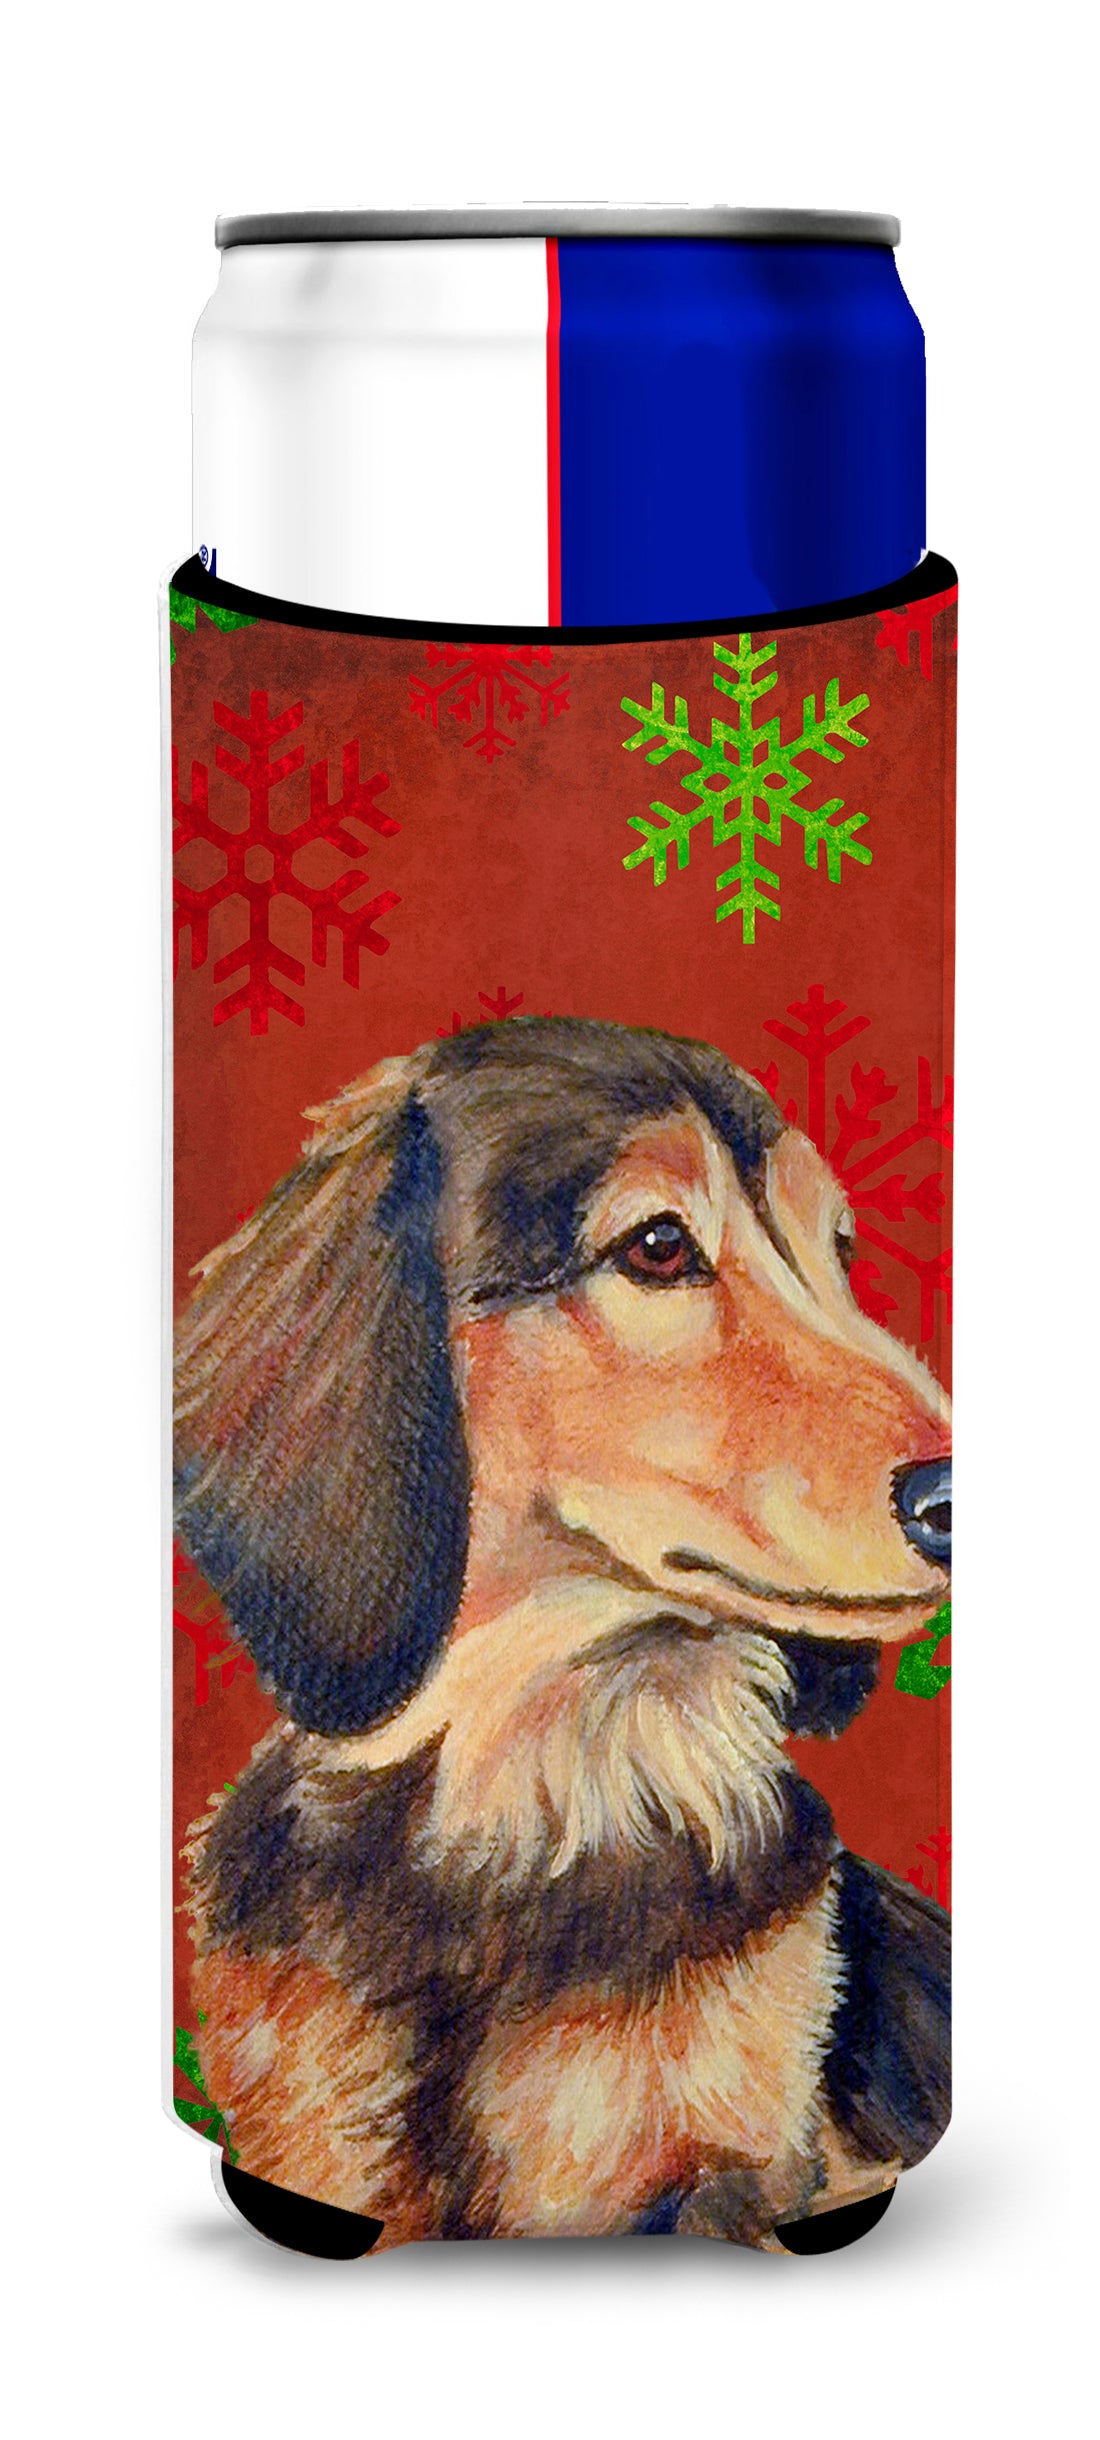 Dachshund Red and Green Snowflakes Holiday Christmas Ultra Beverage Insulators for slim cans LH9346MUK.